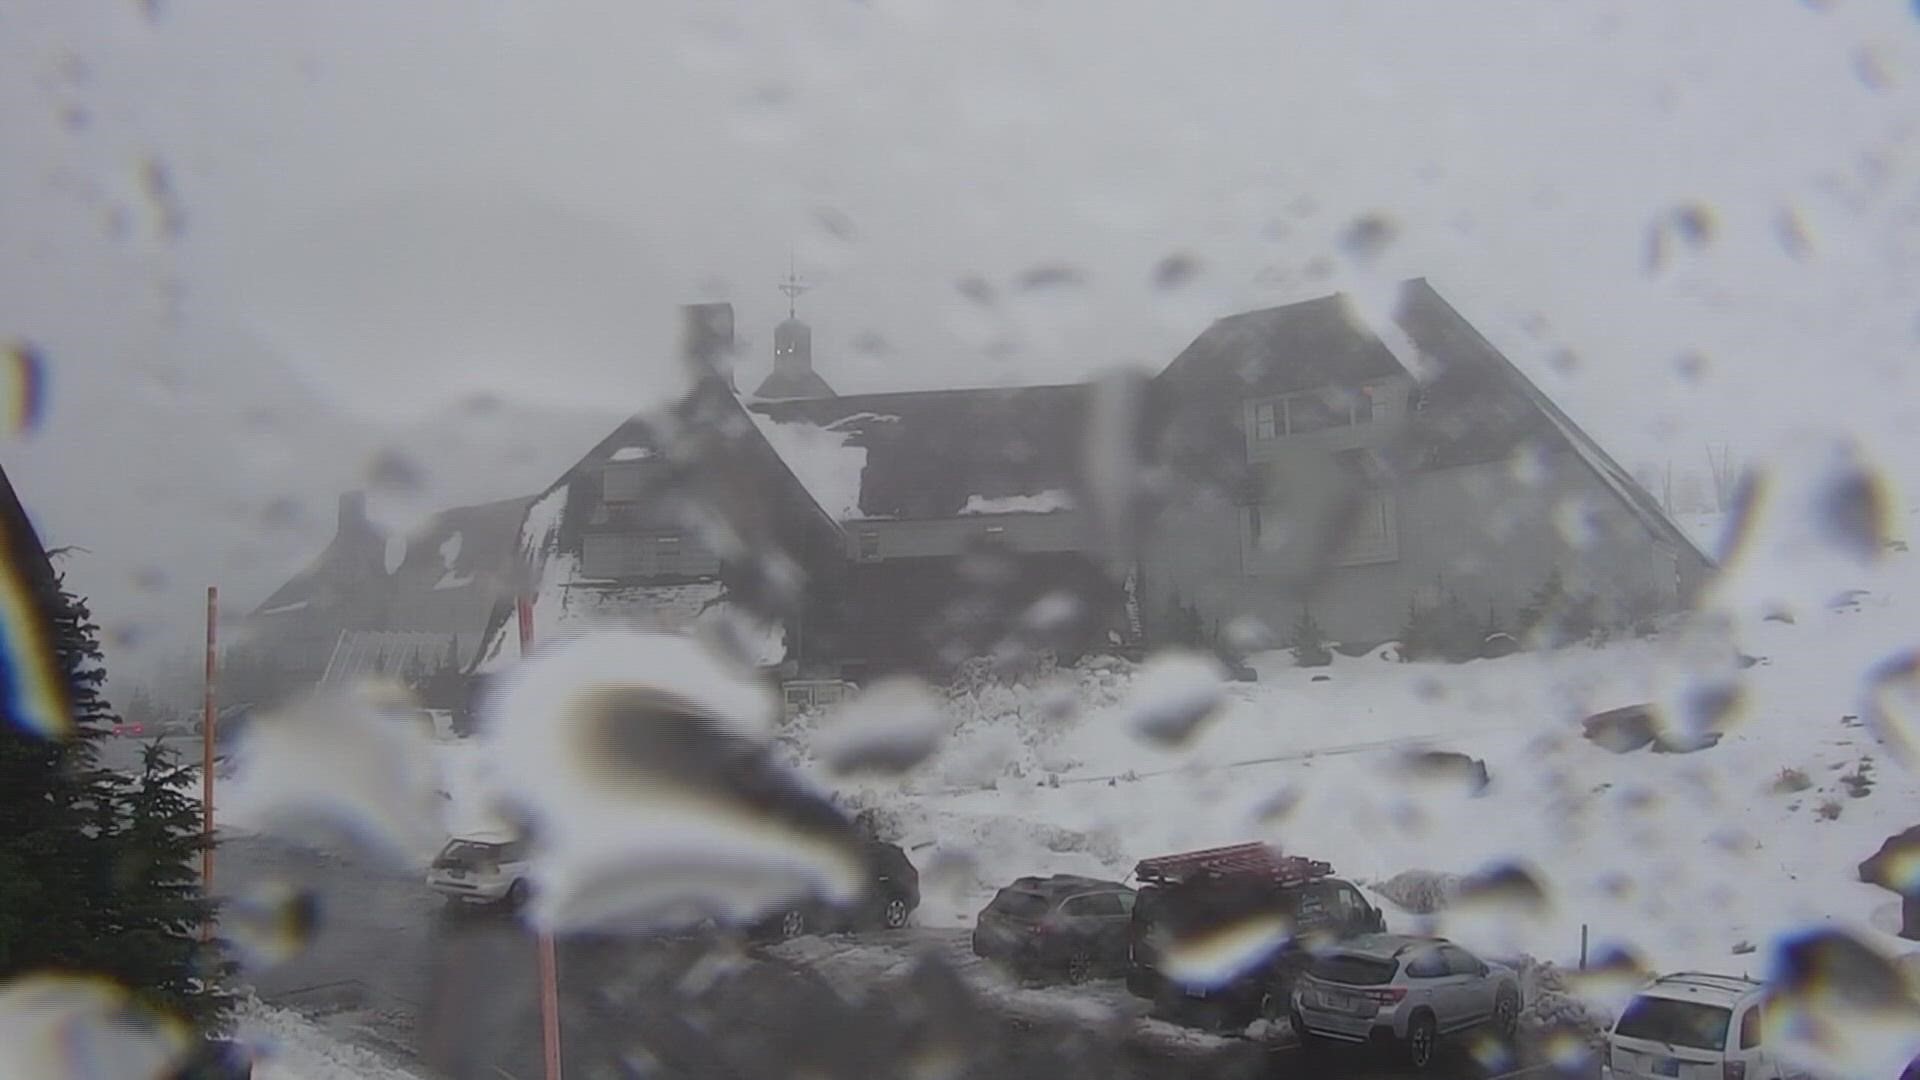 Video from webcams at Timberline Lodge and on U.S. 26 in Government Camp, Ore. shows the rain coming down, on Friday, Nov. 4, 2022.